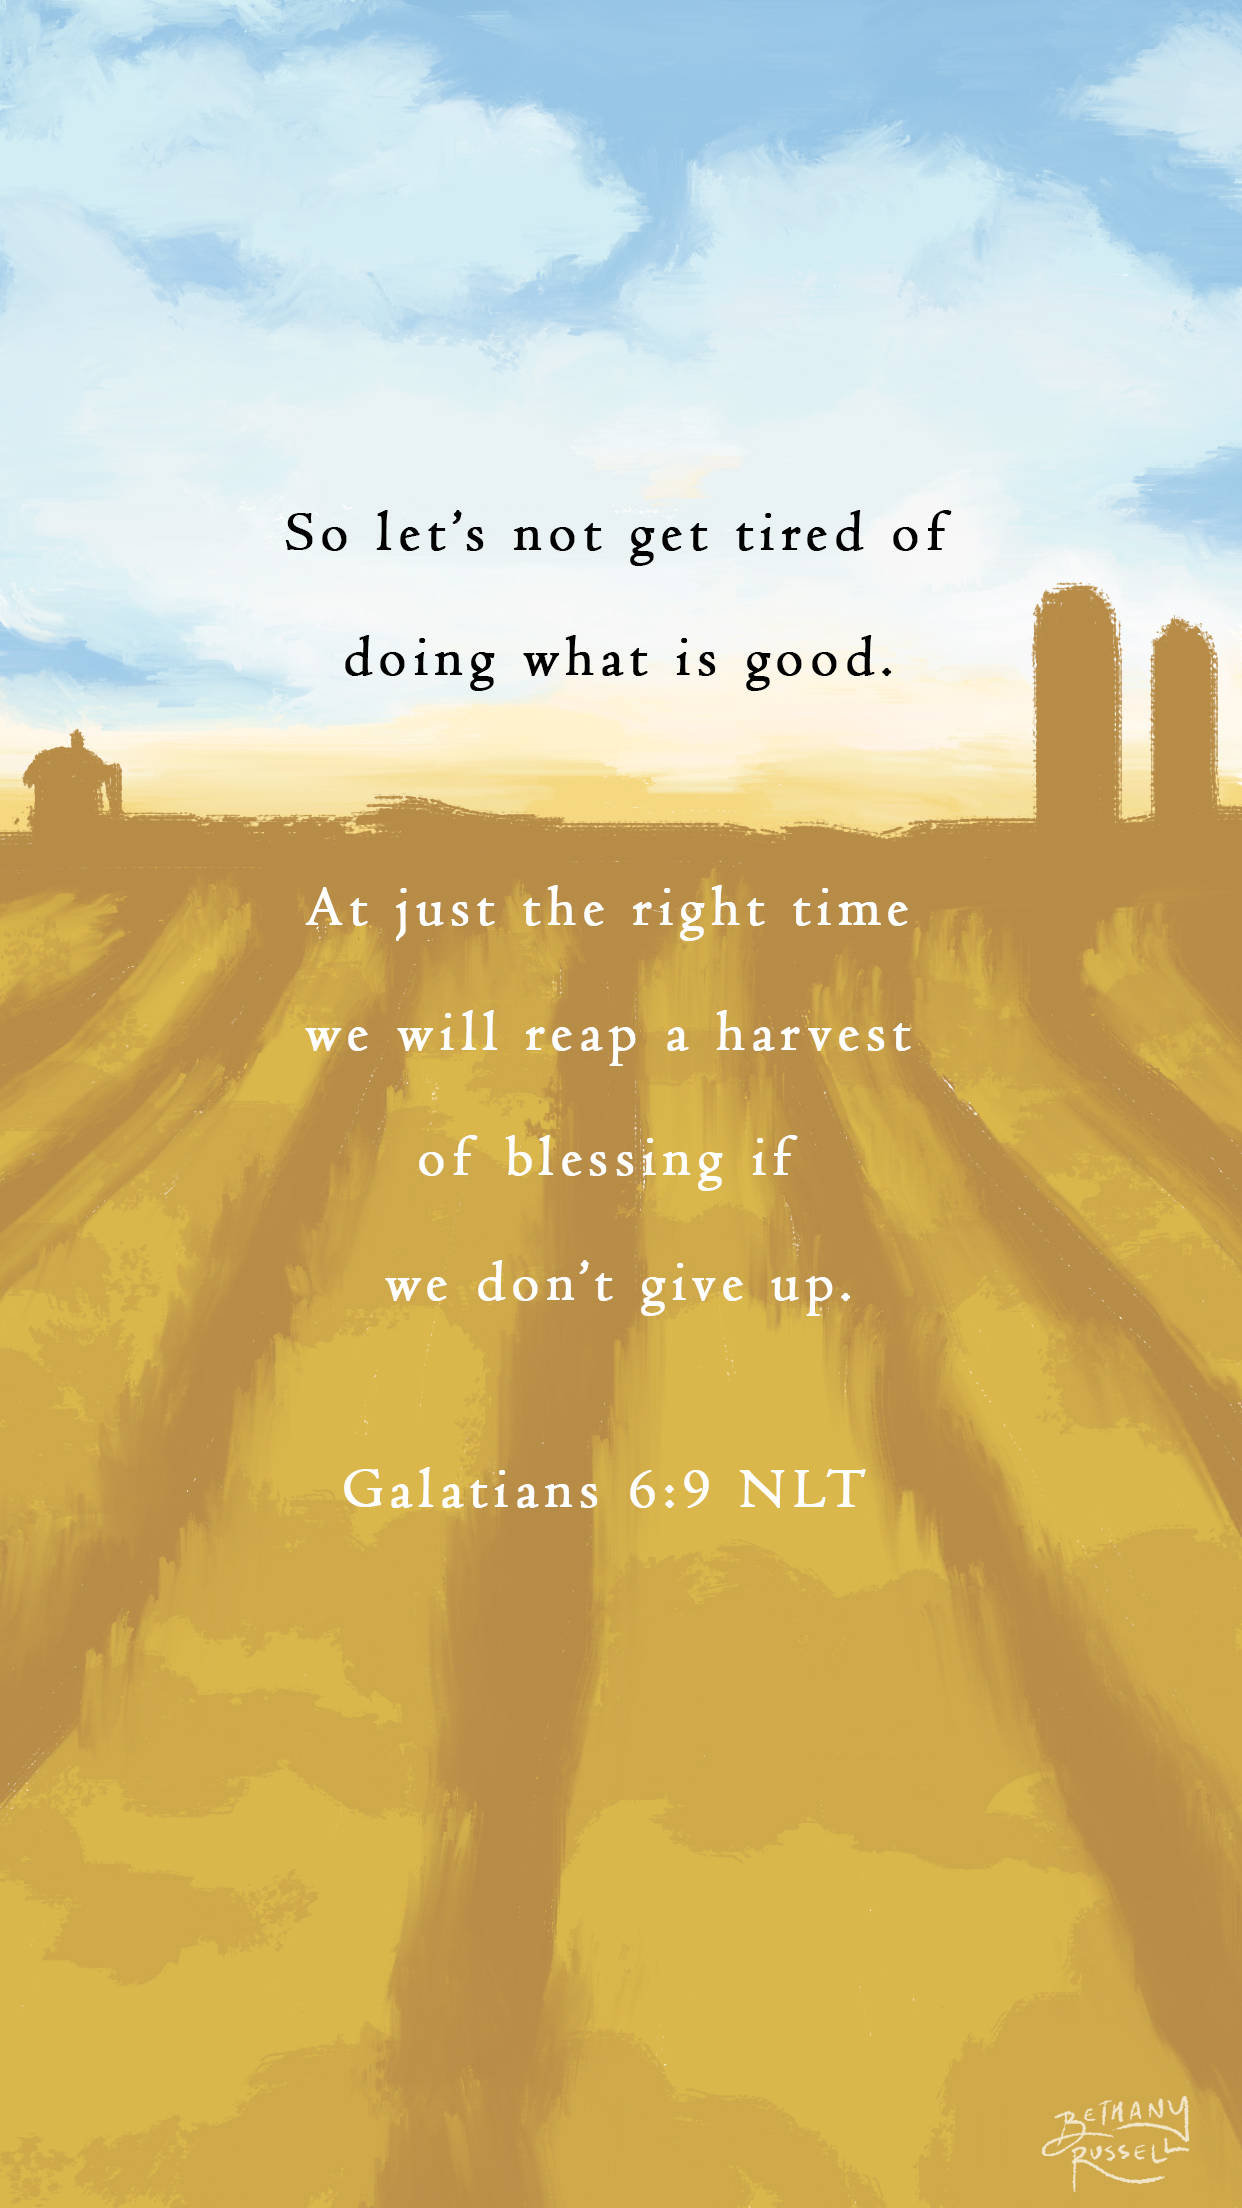 Free Bible Verse and Christian Phone Wallpaper